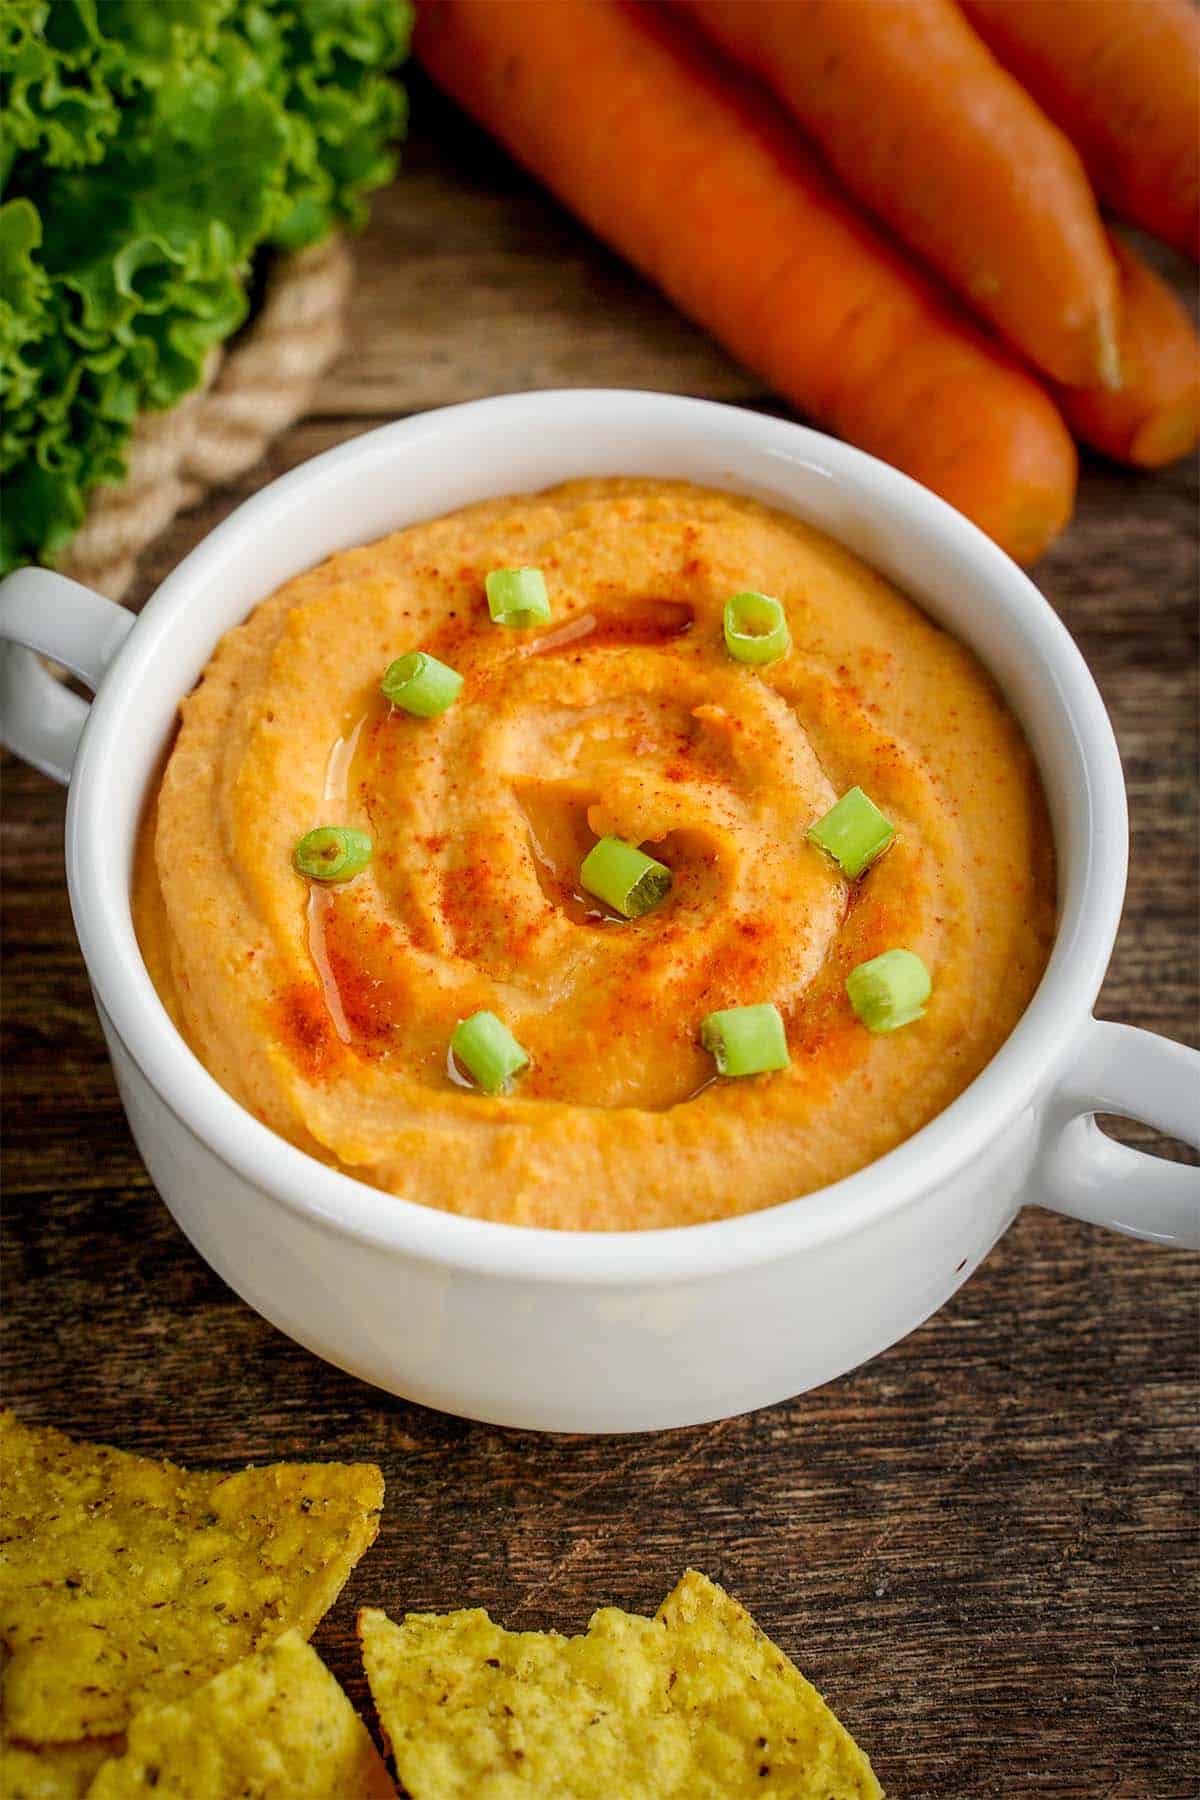 easy picnic side dish of roasted red pepper hummus